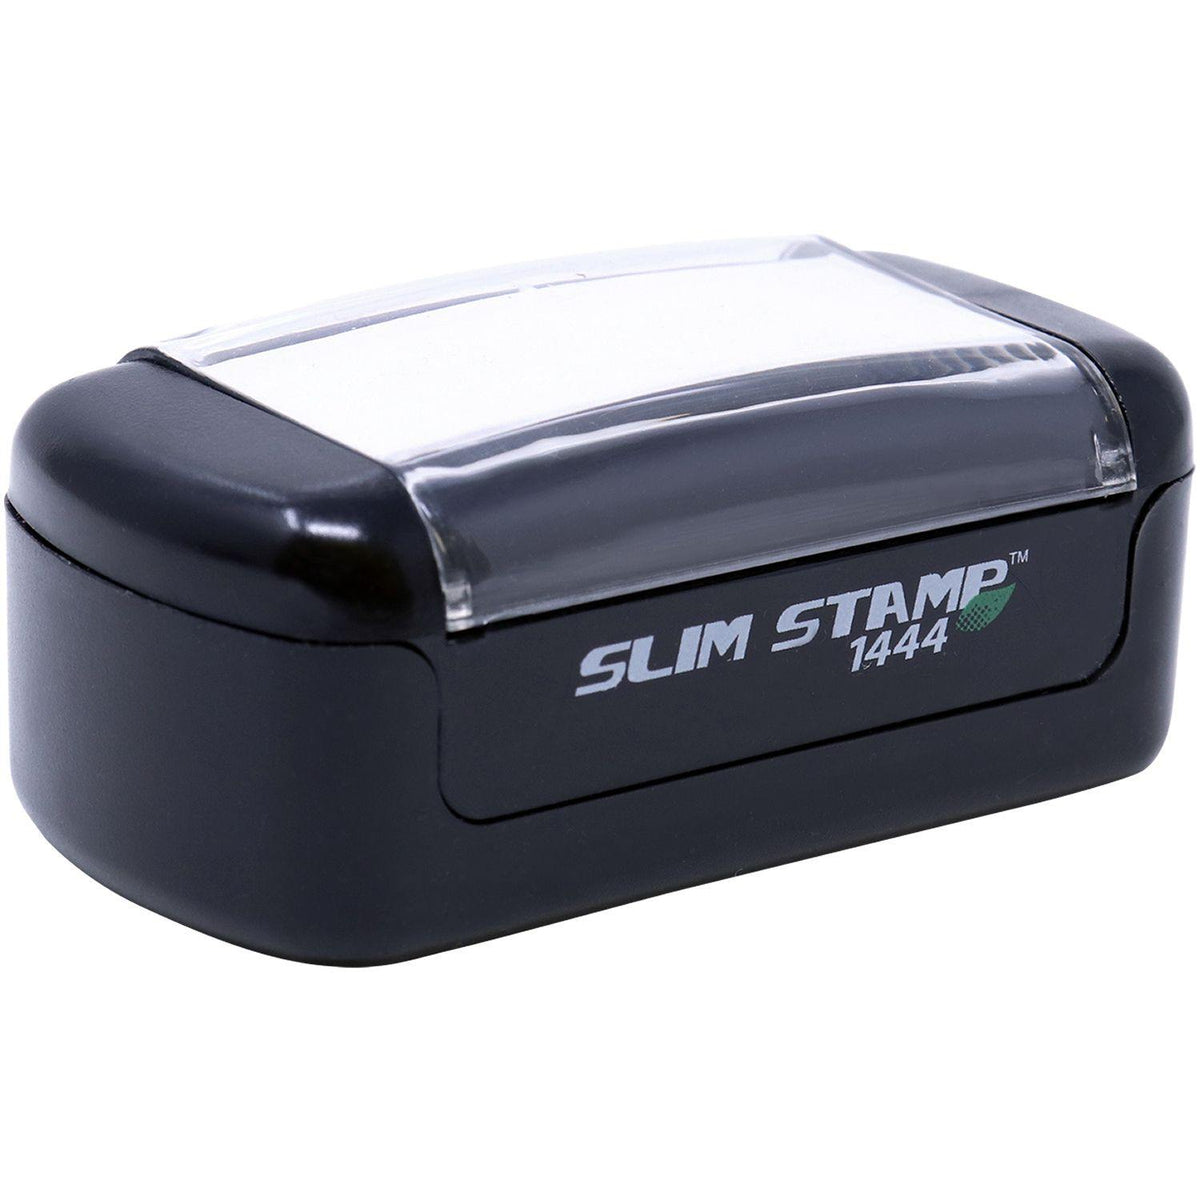 Slim Pre Inked Cancelled Stamp - Engineer Seal Stamps - Brand_Slim, Impression Size_Small, Stamp Type_Pre-Inked Stamp, Type of Use_Office